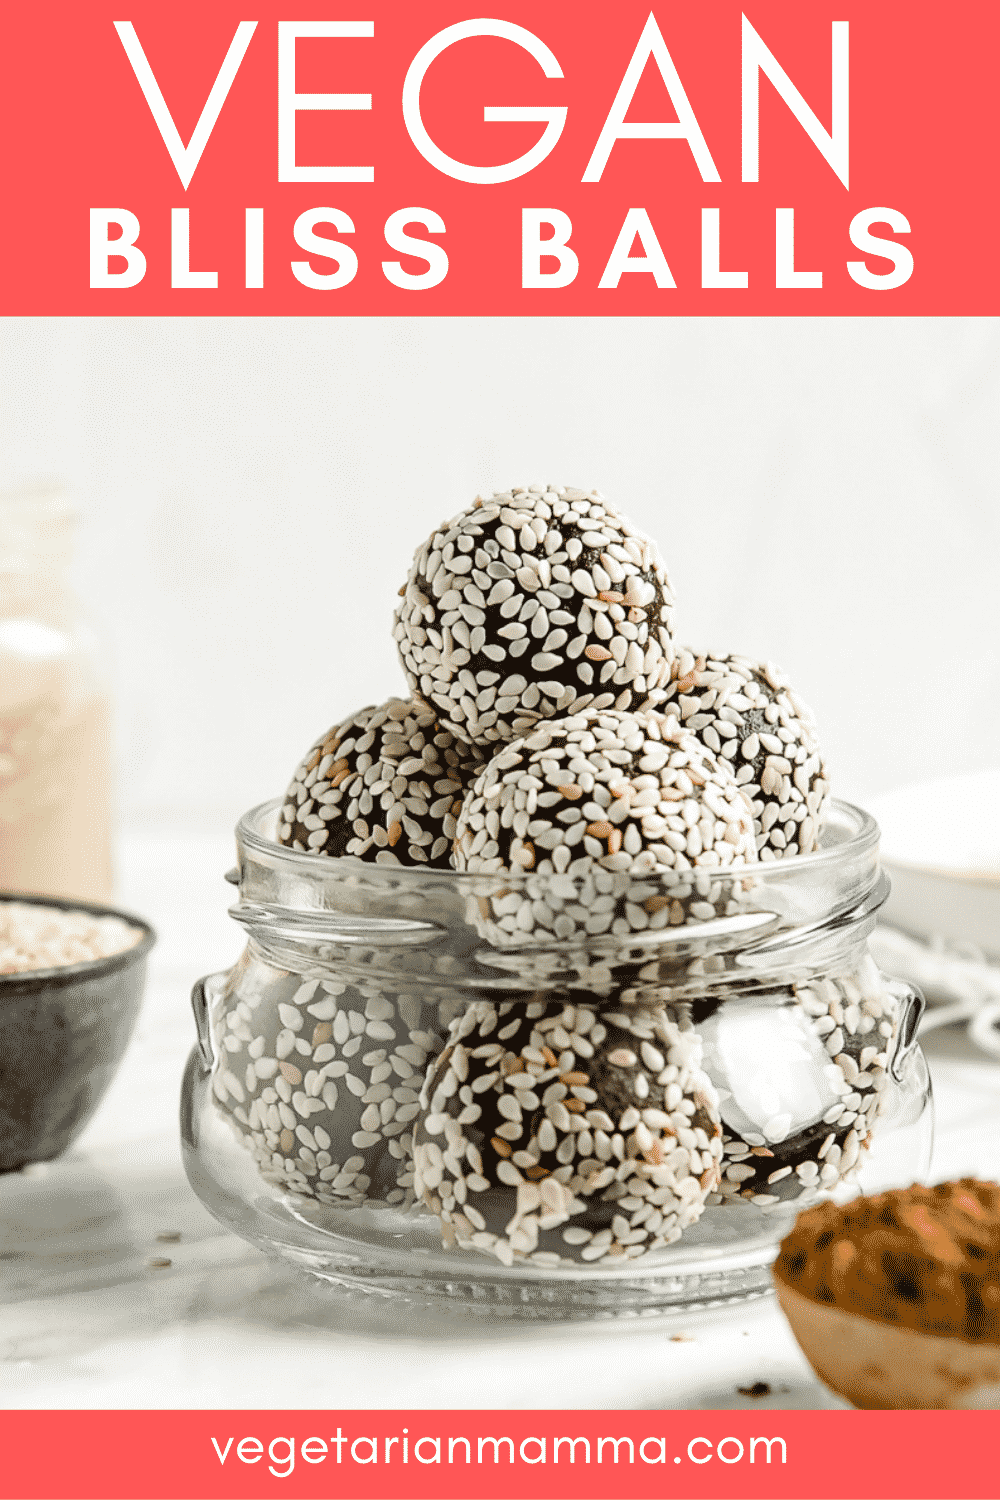 Bliss Balls are so decadent you'll forget they're healthy, too! These vegan chocolate tahini balls are covered in sesame seeds for the best no-bake dessert, afternoon snack, or even breakfast on-the-go. #vegansnack #energyballs